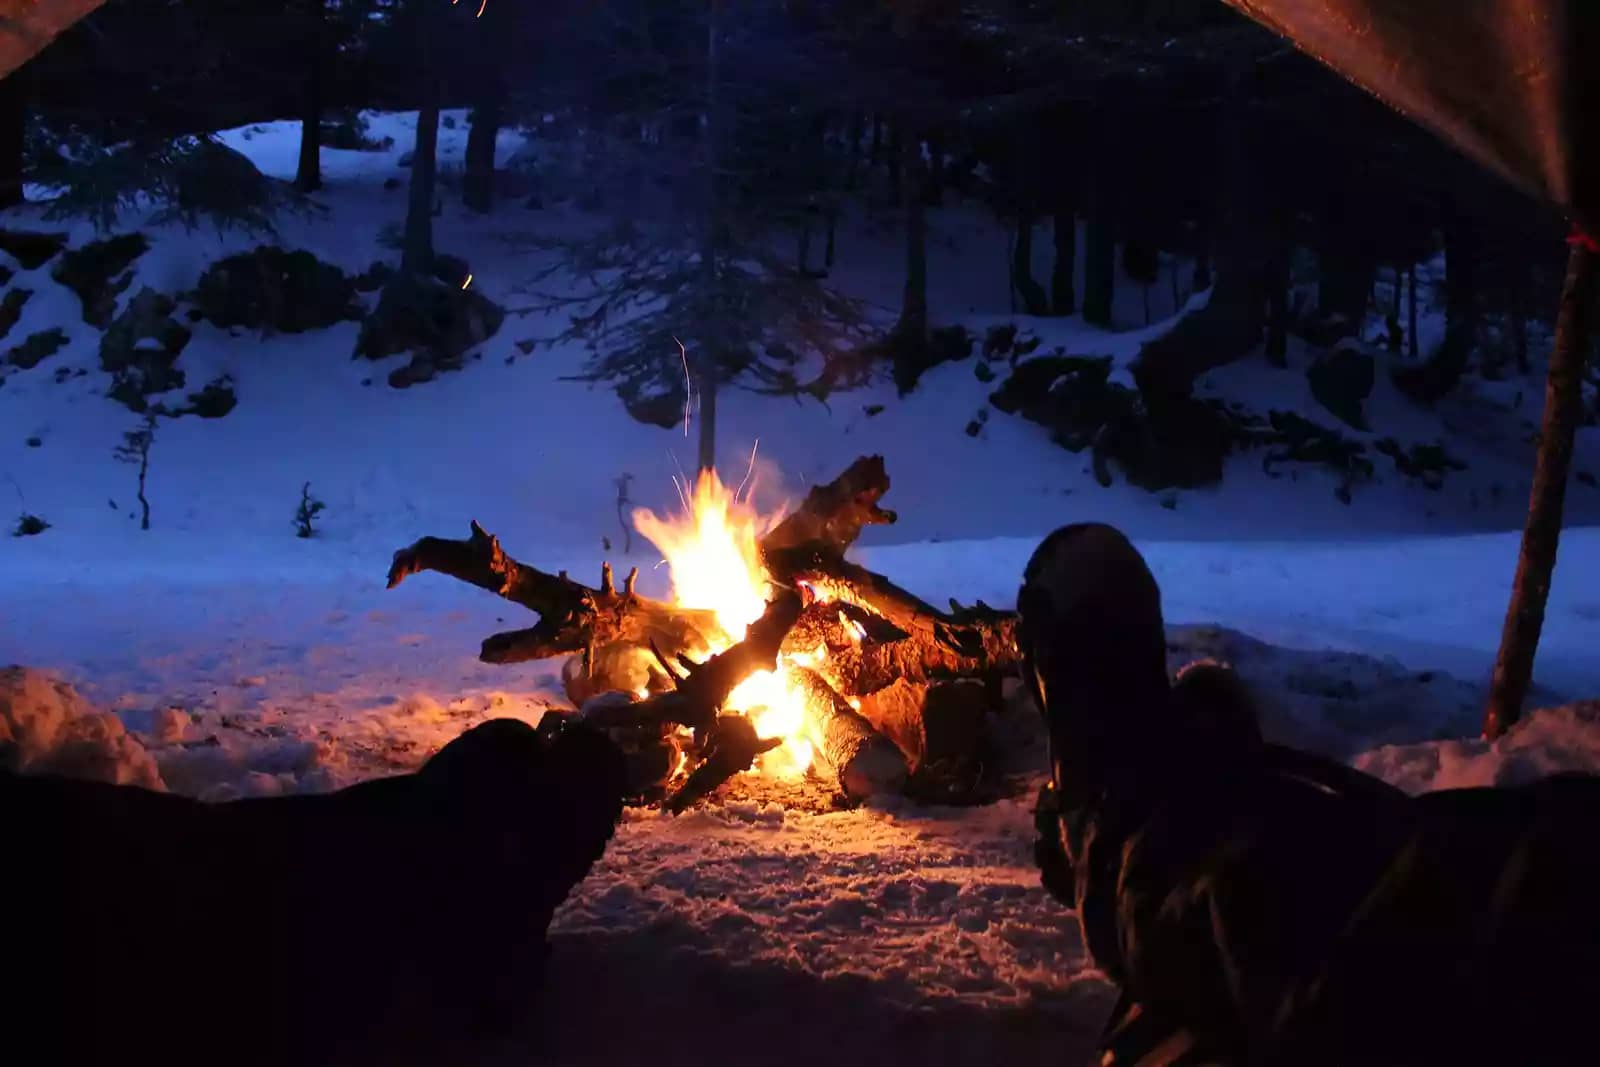 Two sets of legs and feet in winter camping gear are silhouetted in front of a roaring orange campfire, framed by a tent door.